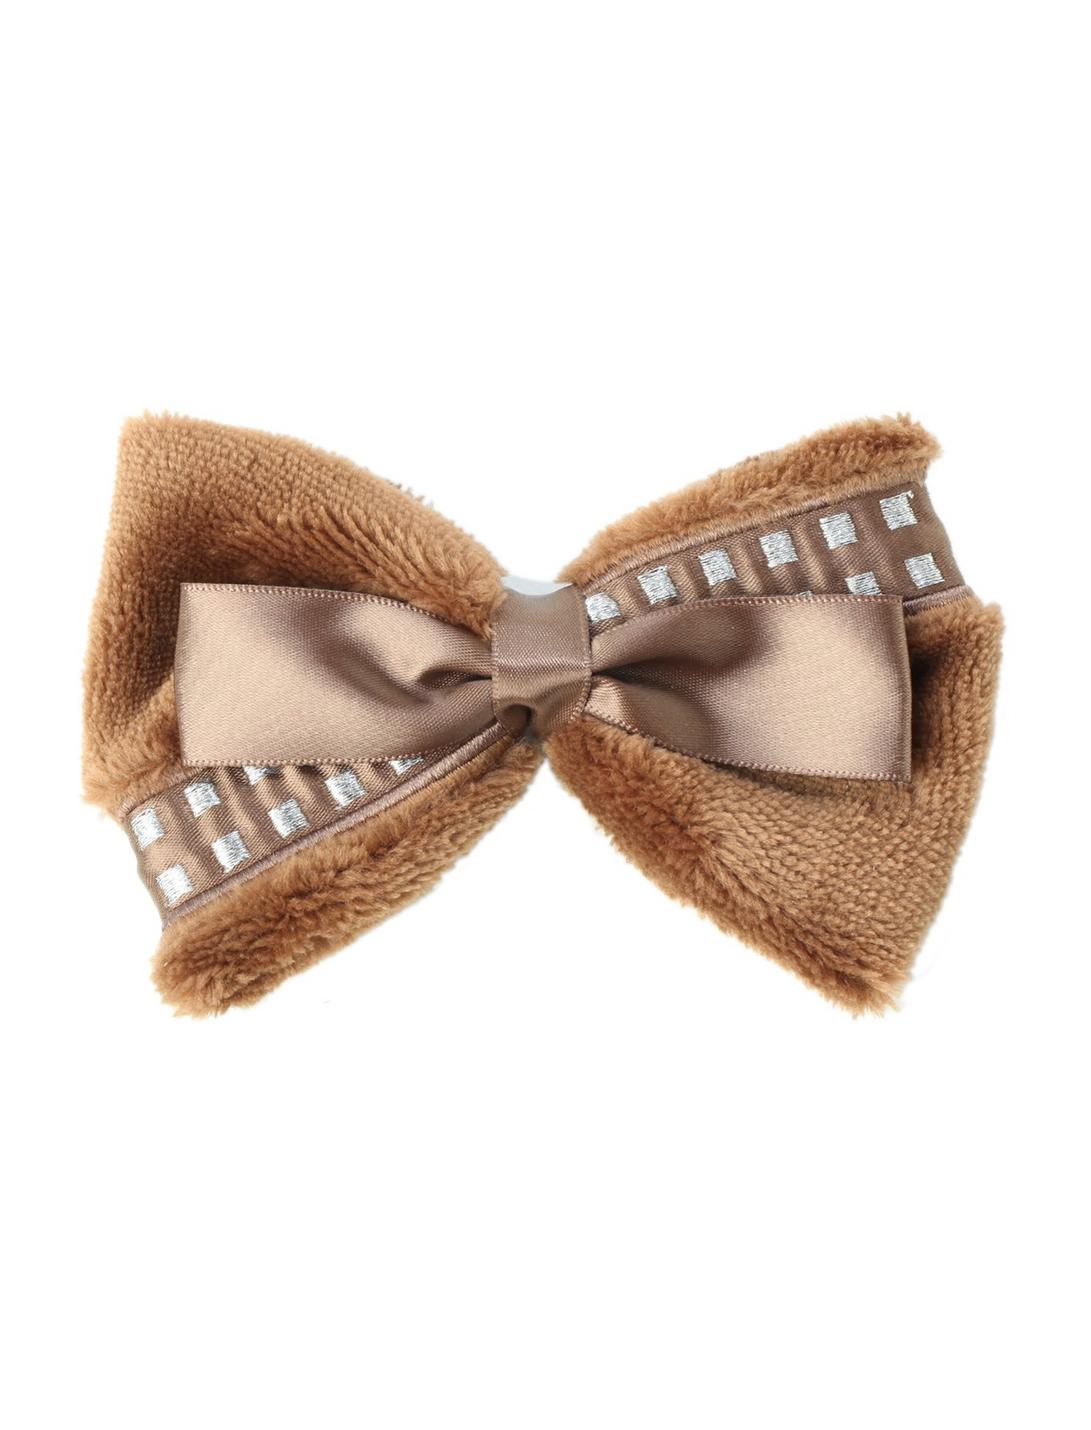 Star Wars Chewbacca Faux Fur Cosplay Bow, , hi-res